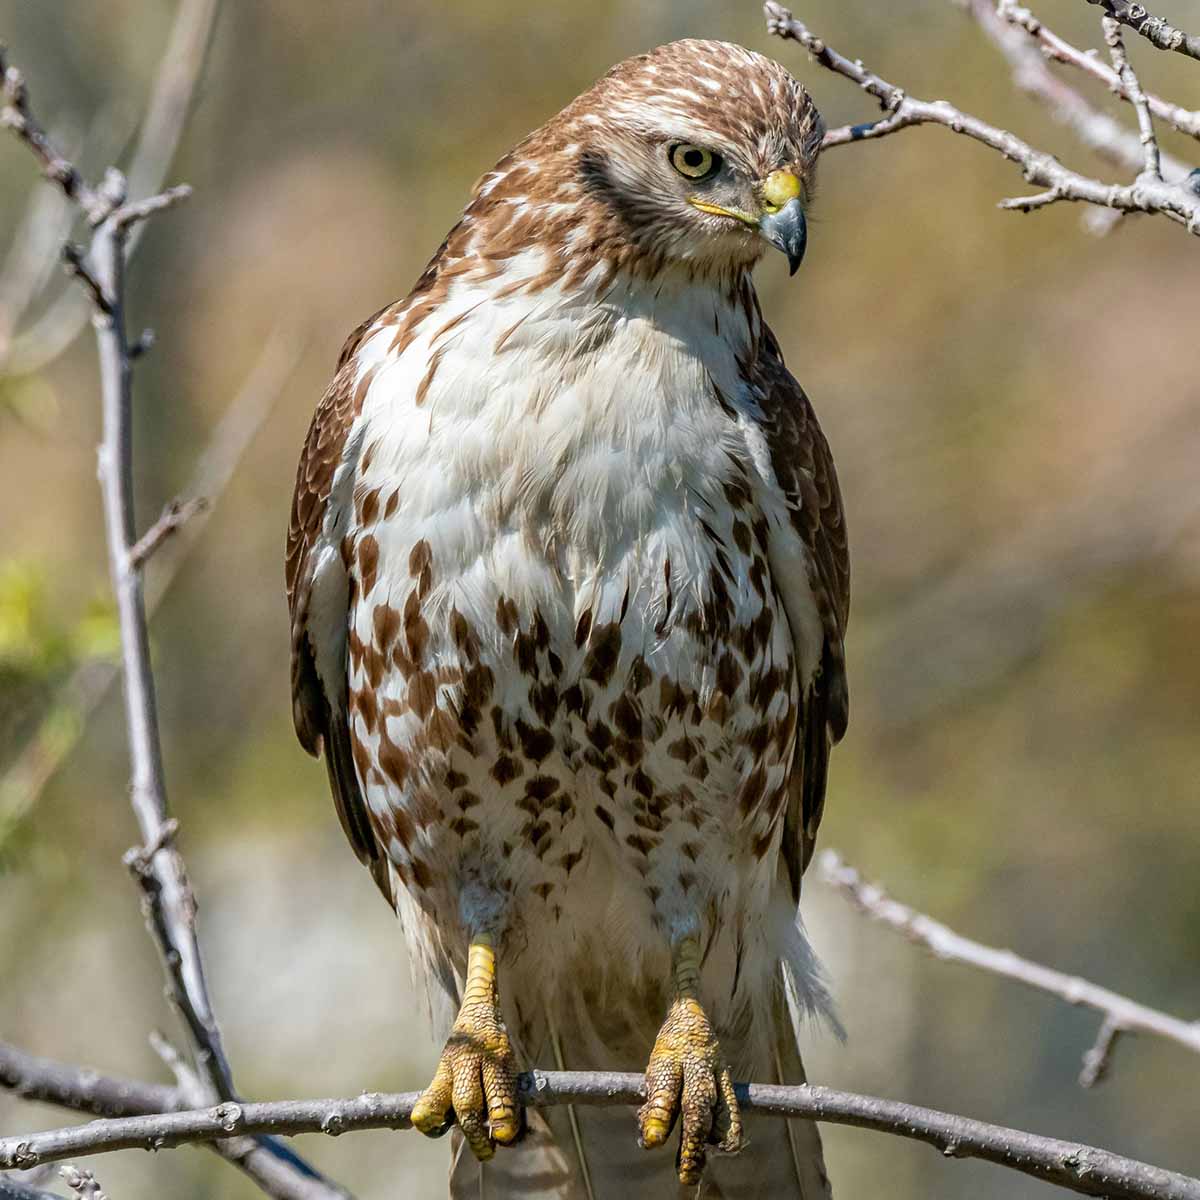 The image shows a majestic red-tailed hawk perched on a tree branch. The hawk has a large, powerful build with broad wings and a distinctive reddish-brown tail feathers that give it its name. Its sharp, hooked beak and intense gaze convey the bird's predatory nature. The hawk is surrounded by lush, green foliage, suggesting a natural, outdoor setting. Overall, the image captures the impressive presence and beauty of this iconic North American raptor.